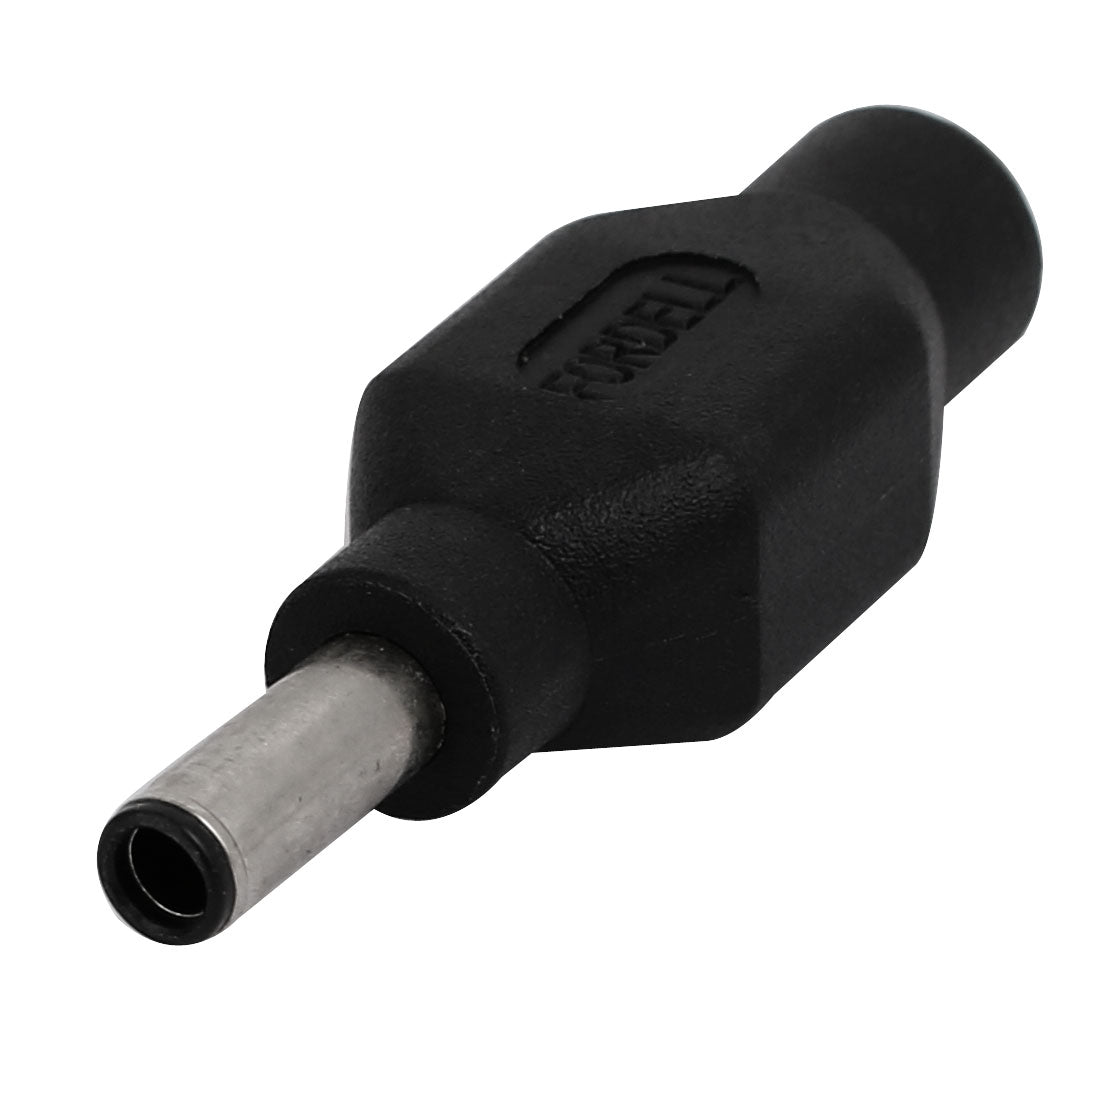 uxcell Uxcell 5.5mm x 2.1mm Female to 4.5mm x 3mm Male Jack DC Power Adapter Connector Black